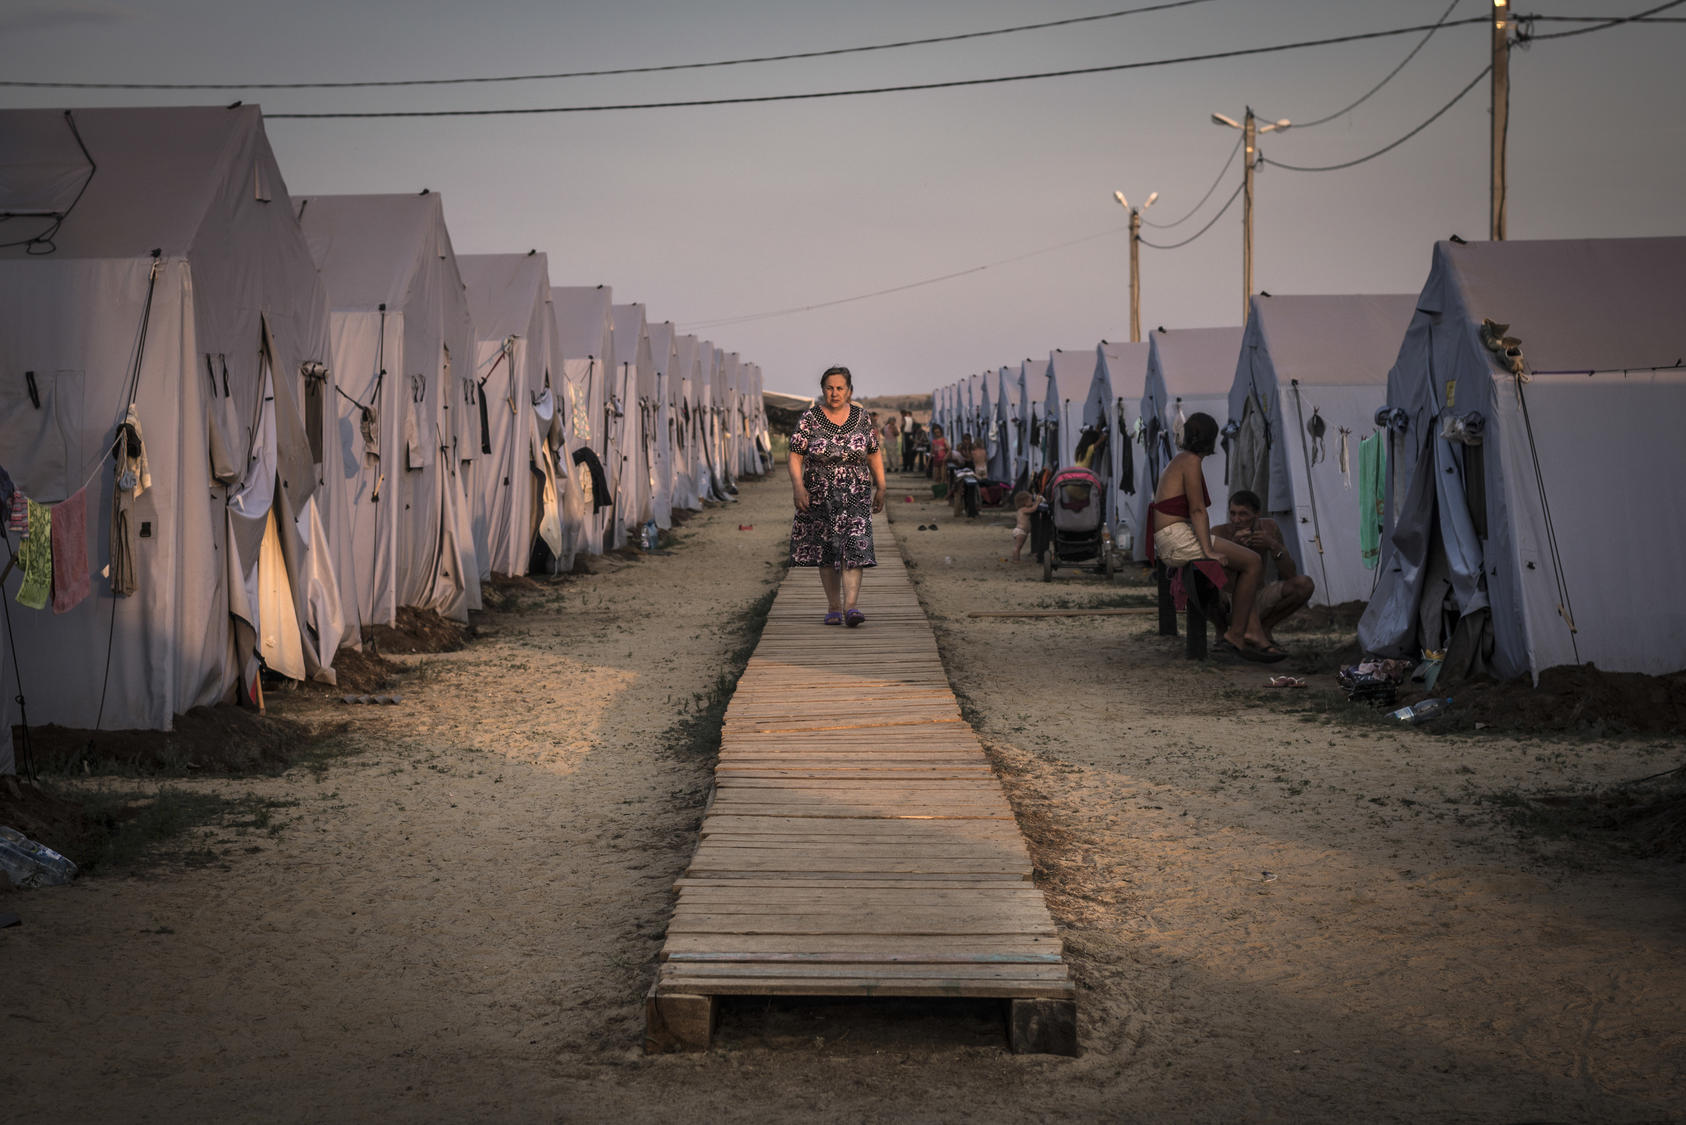 A woman walks among the tents at a refugee camp in Donetsk, Aug. 22, 2014. The United Nations reports that more than a million Ukrainians have been displaced by war. (Sergey Ponomarev/The New York Times)